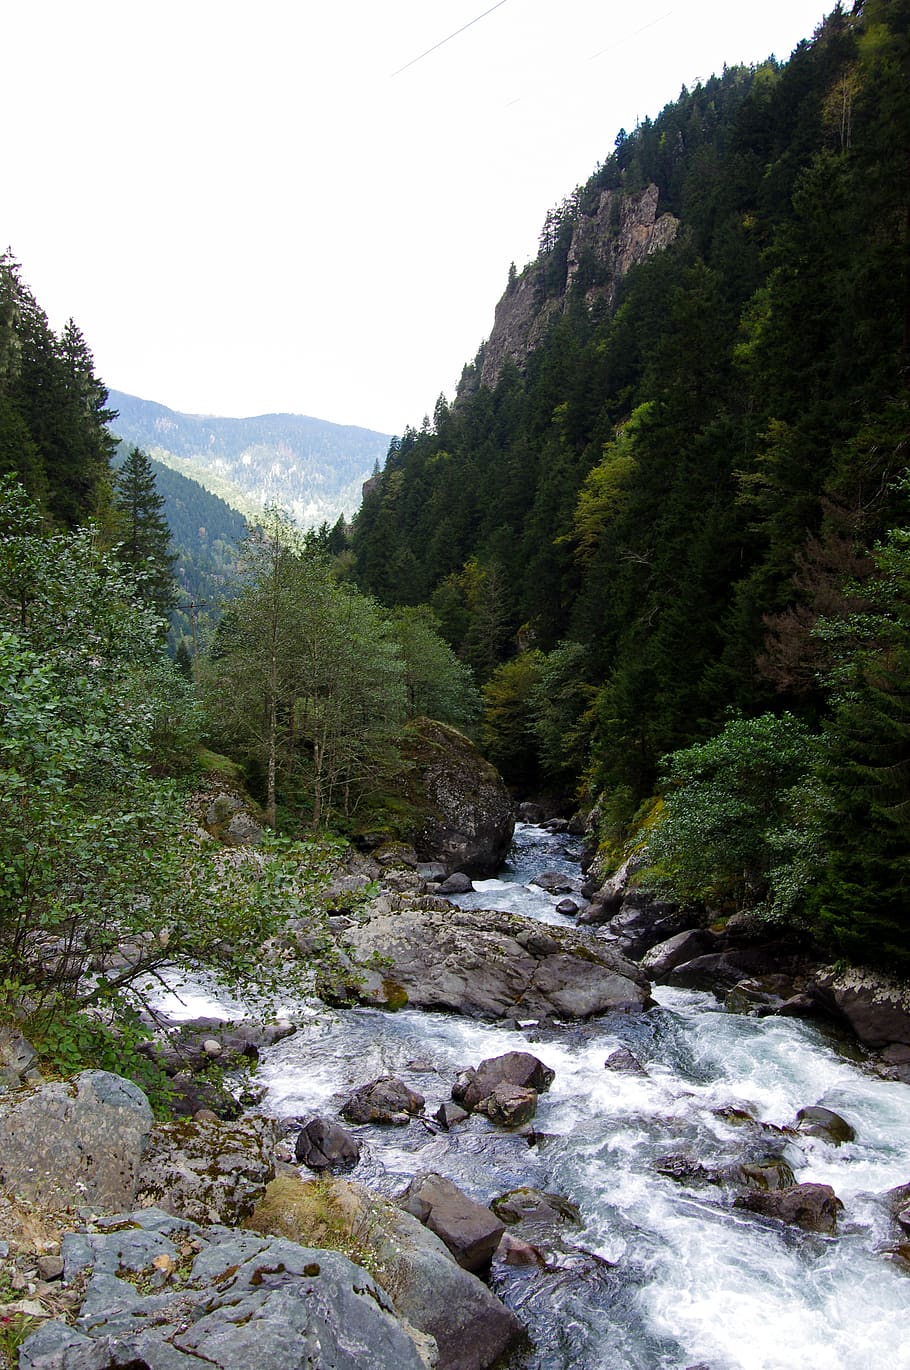 dd, storm, forest, green, streaming, tree, autumn, rize, valley